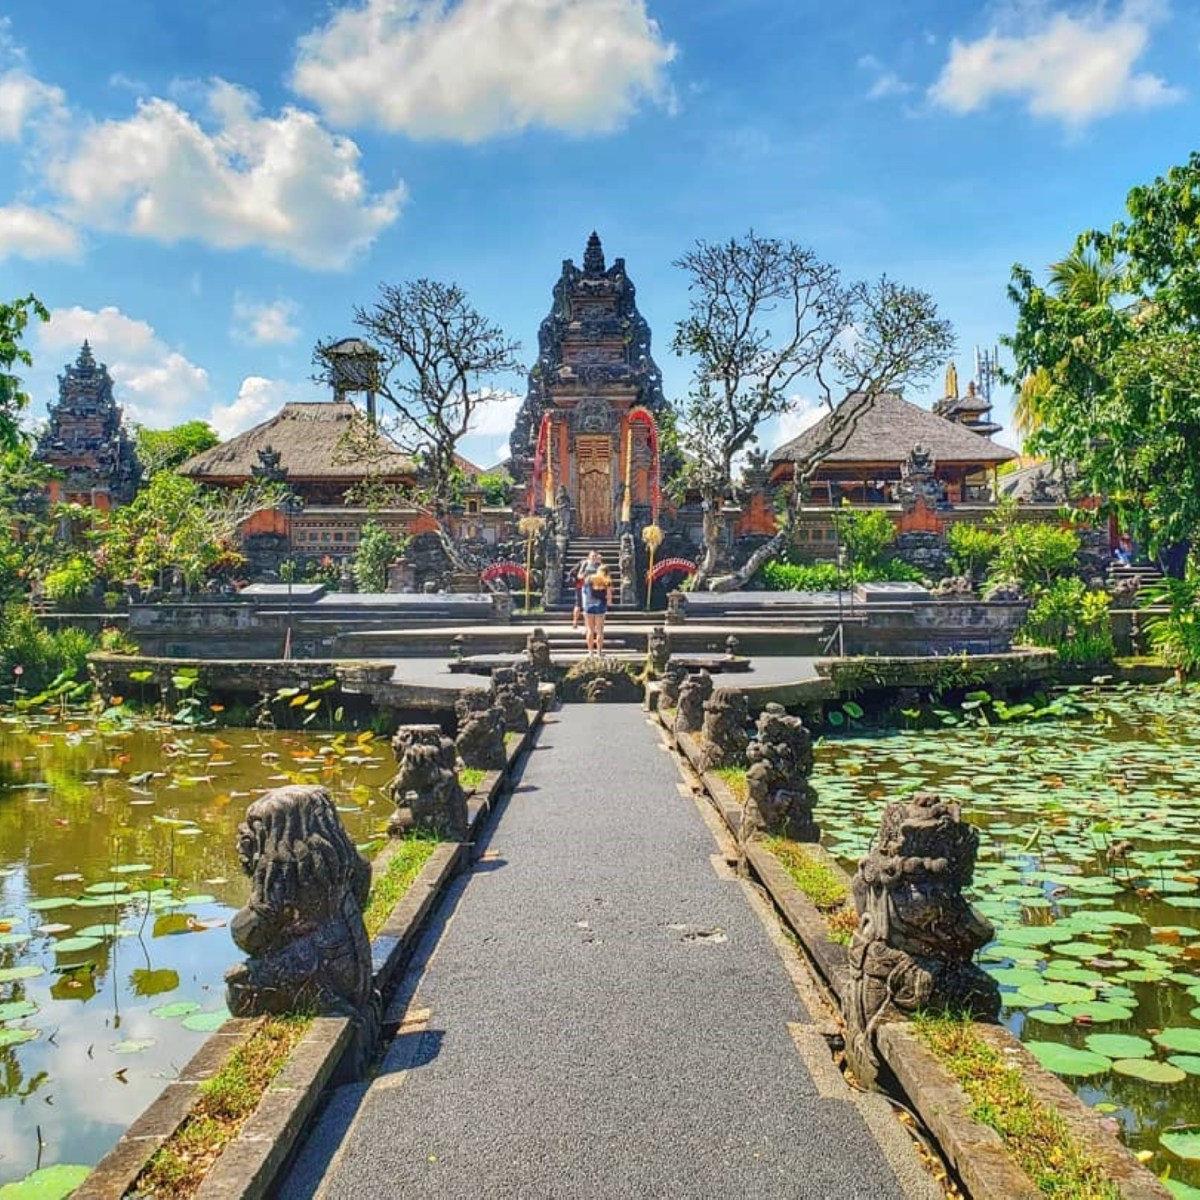 Bali Travel Guide – All You Need to Know